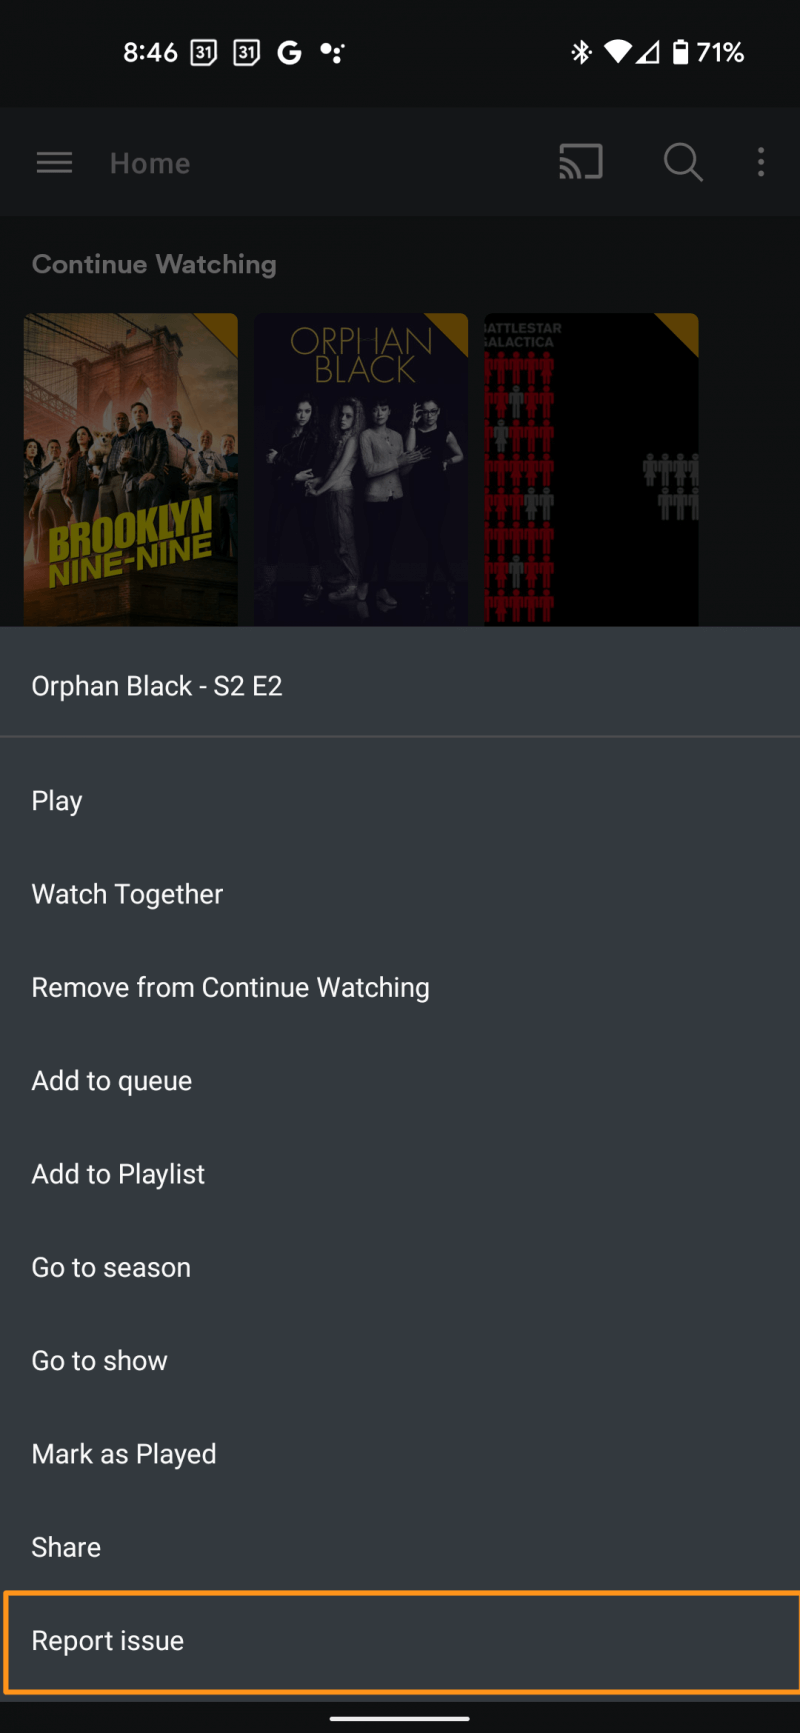 The details page in a mobile app of a TV show from a friend's Plex Media Server, showing the 'Report issue' action available in the context menu.